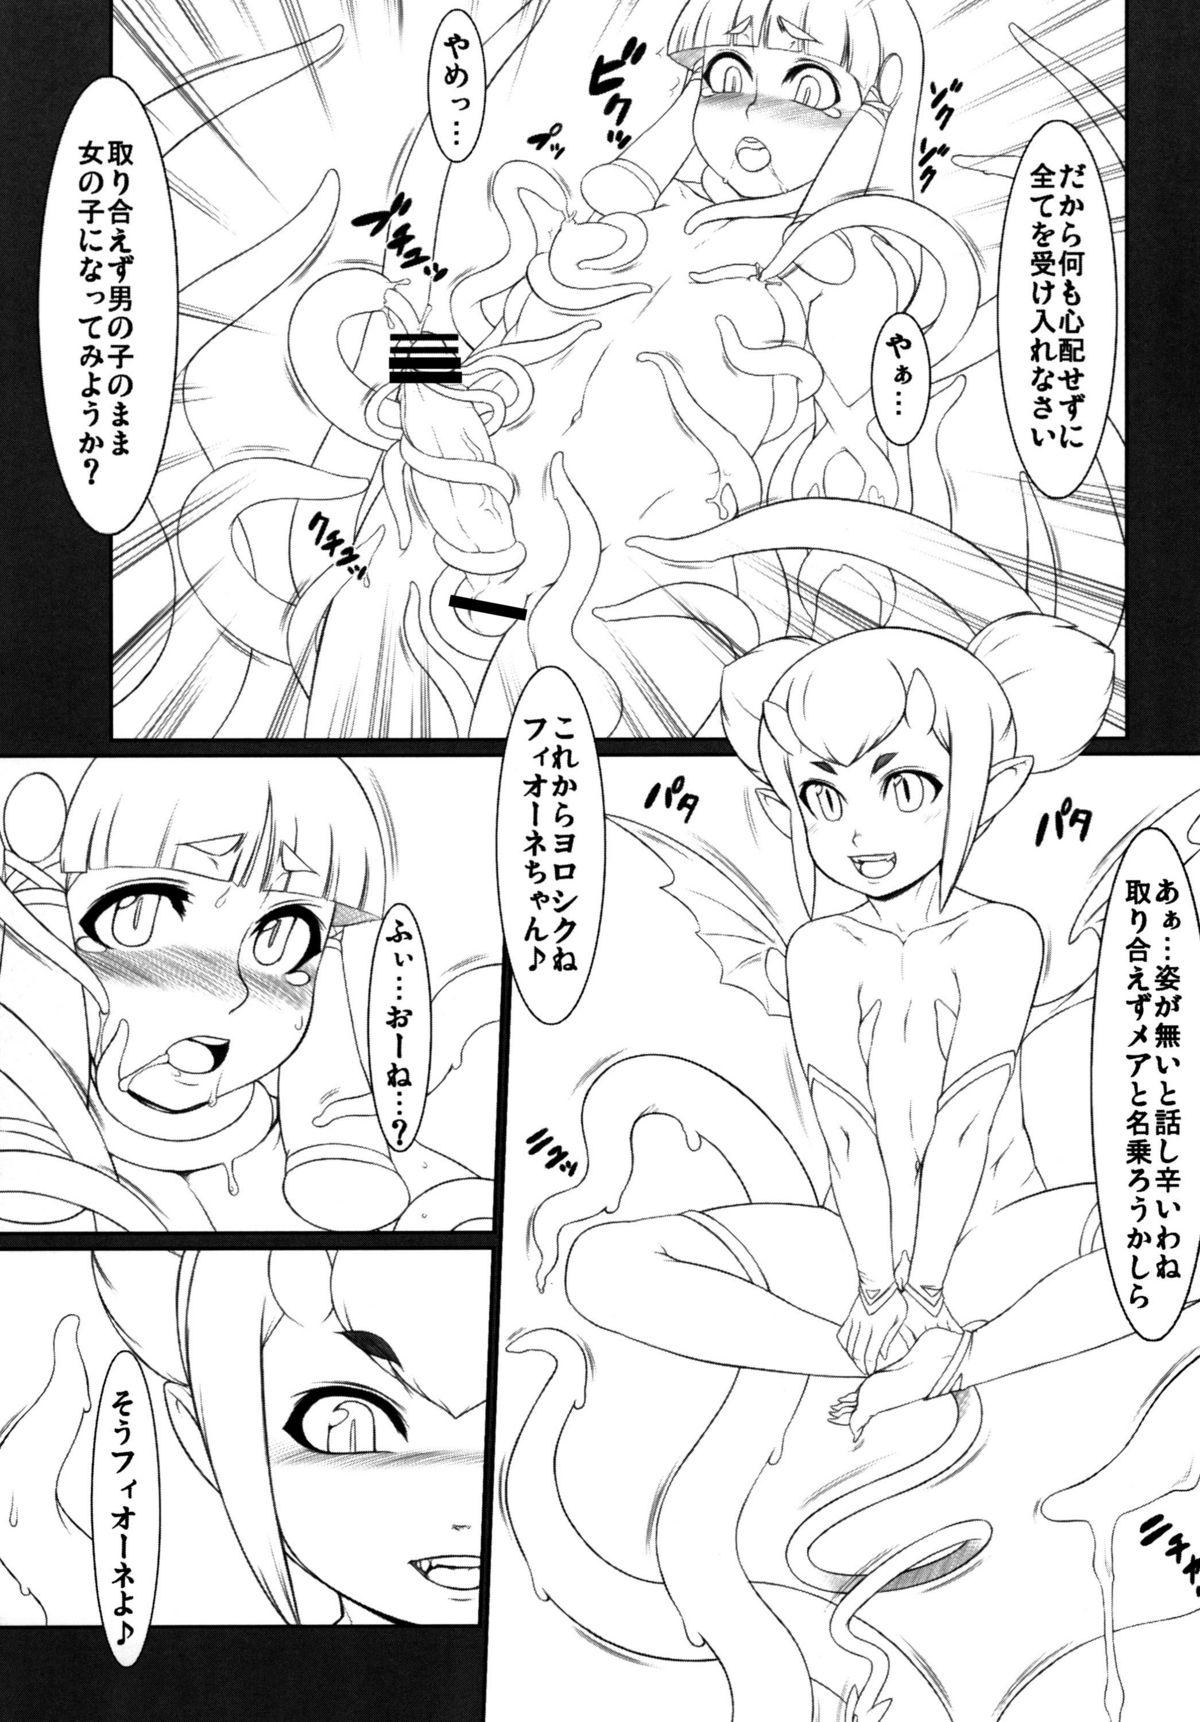 Eating Pussy 淫夢に誘われて… Deep Throat - Page 6